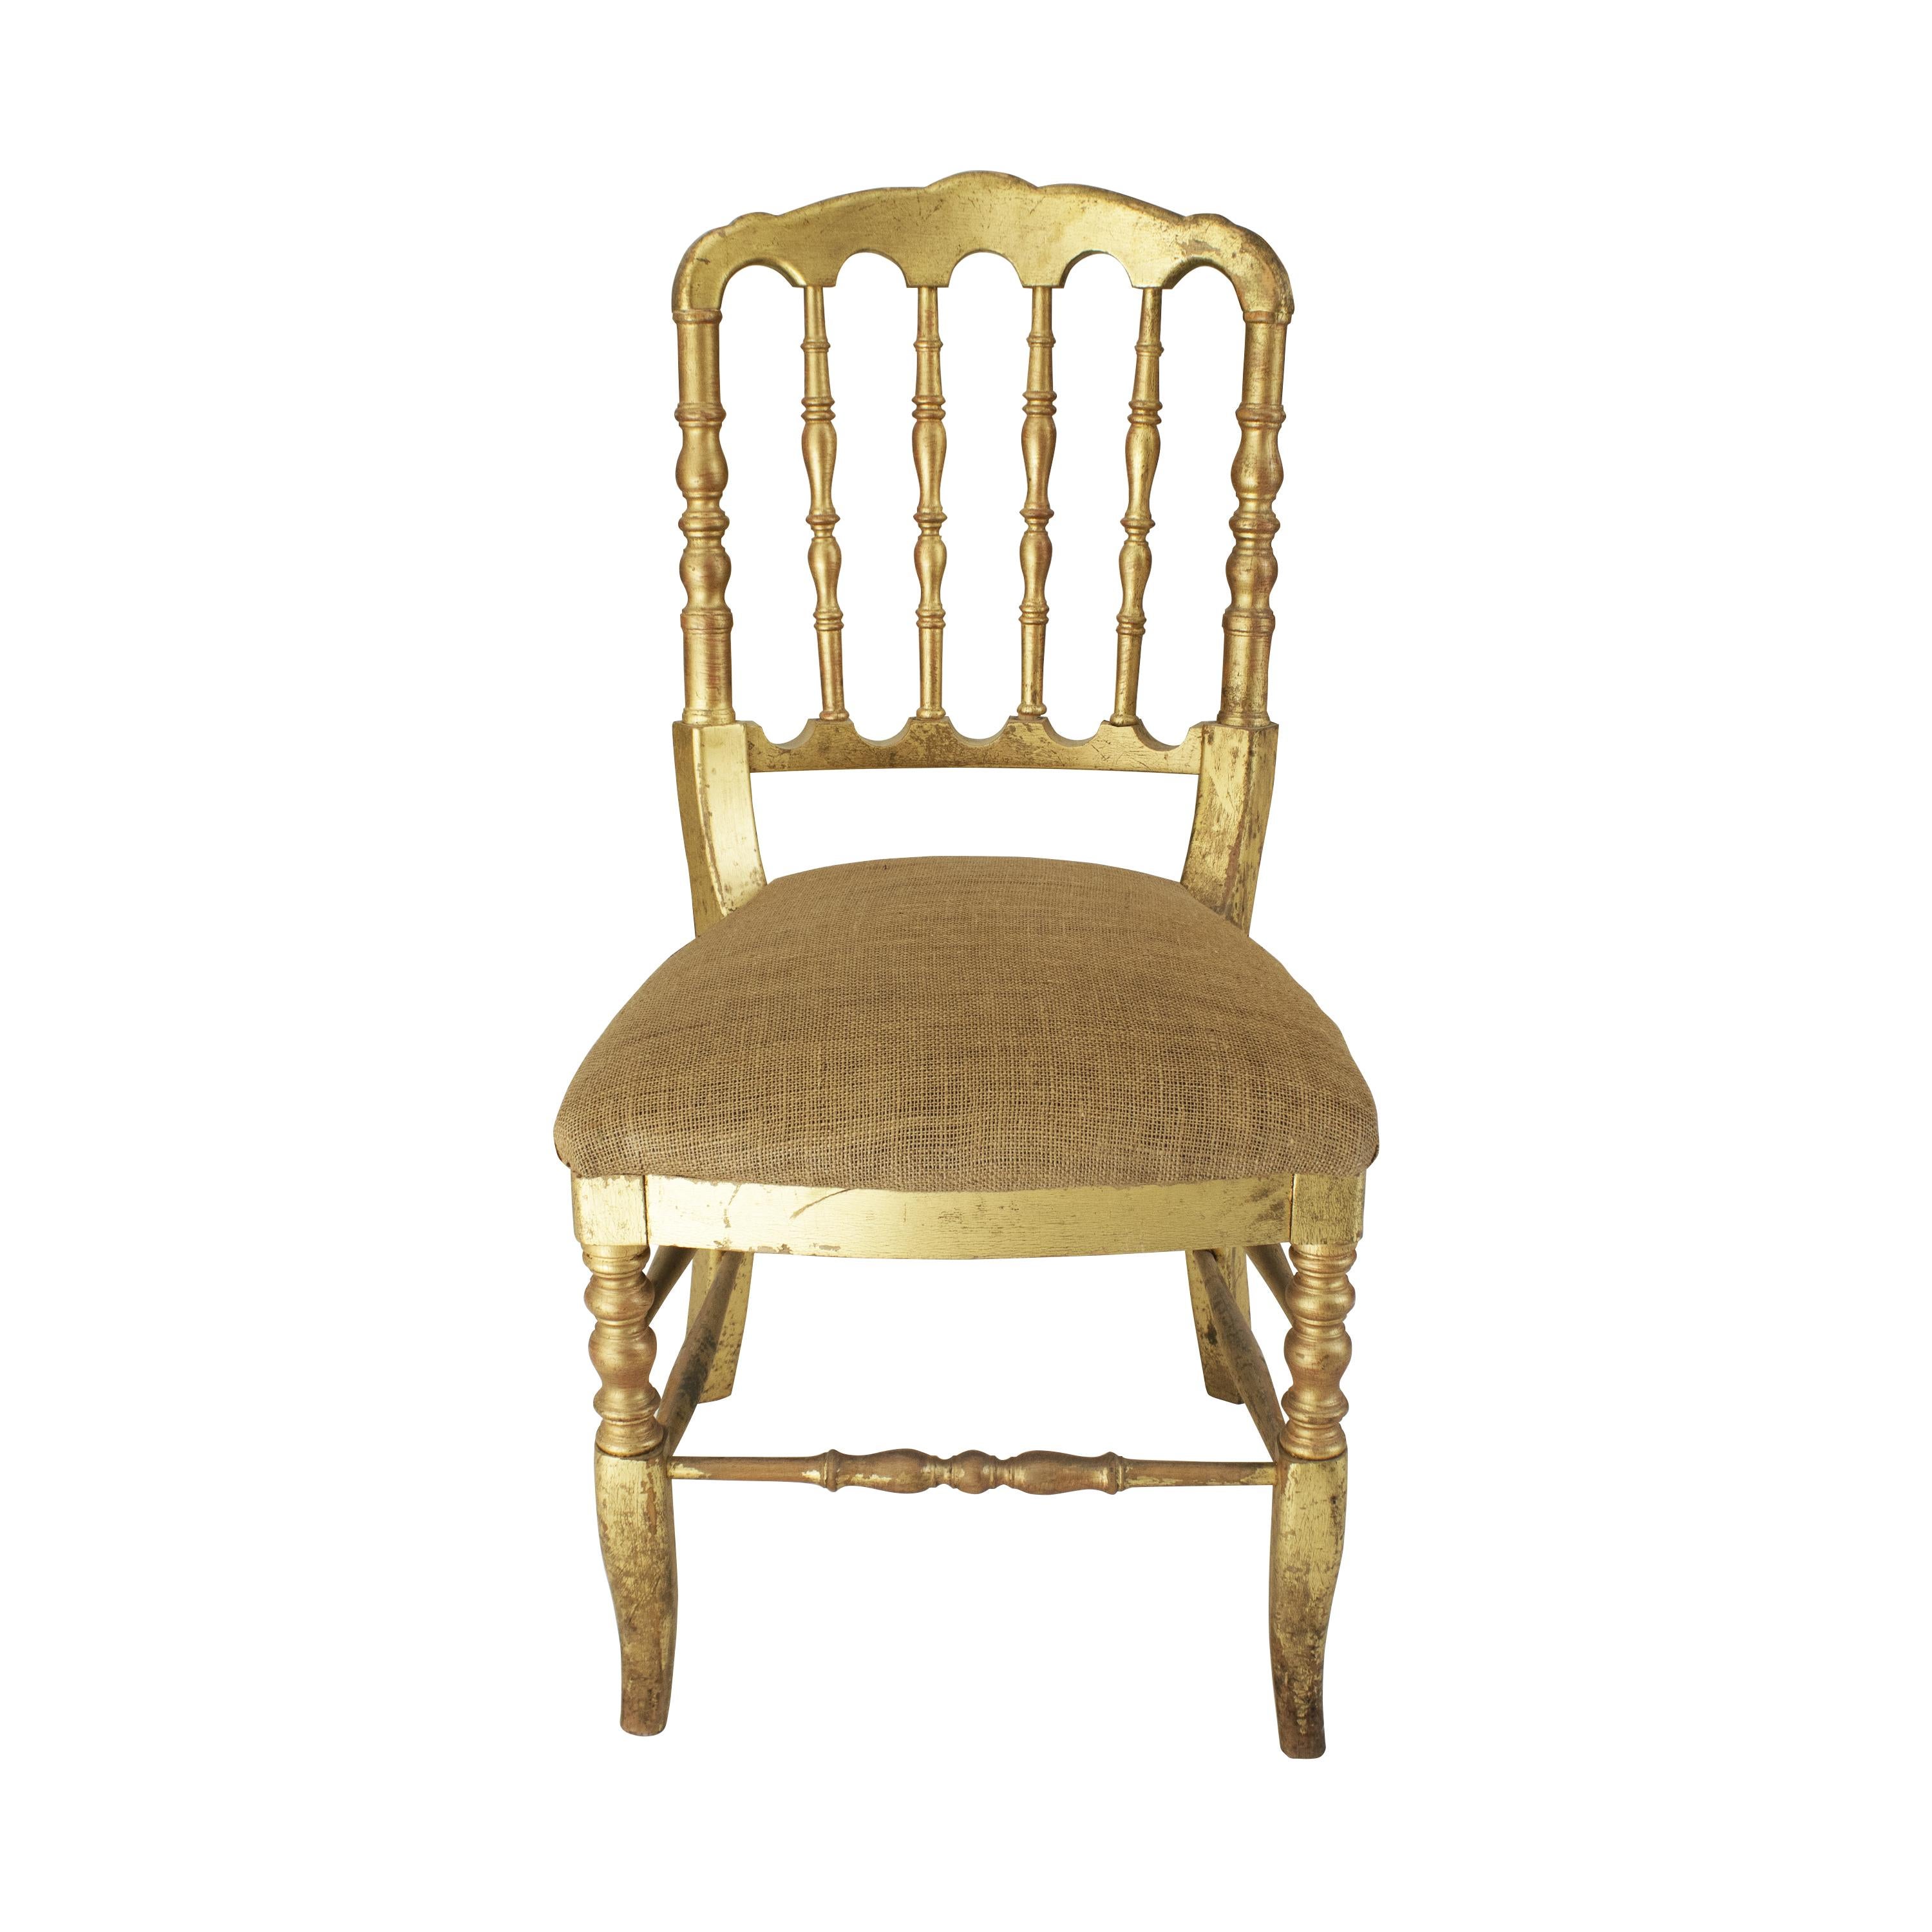 Set of twelve Tiffany style chairs also known as the Chiavari chair made in France circa 1960s. The structure of the chair is made entirely of solid wood turned by hand and polychromed with handmade gold leaf. The padded seat is upholstered in